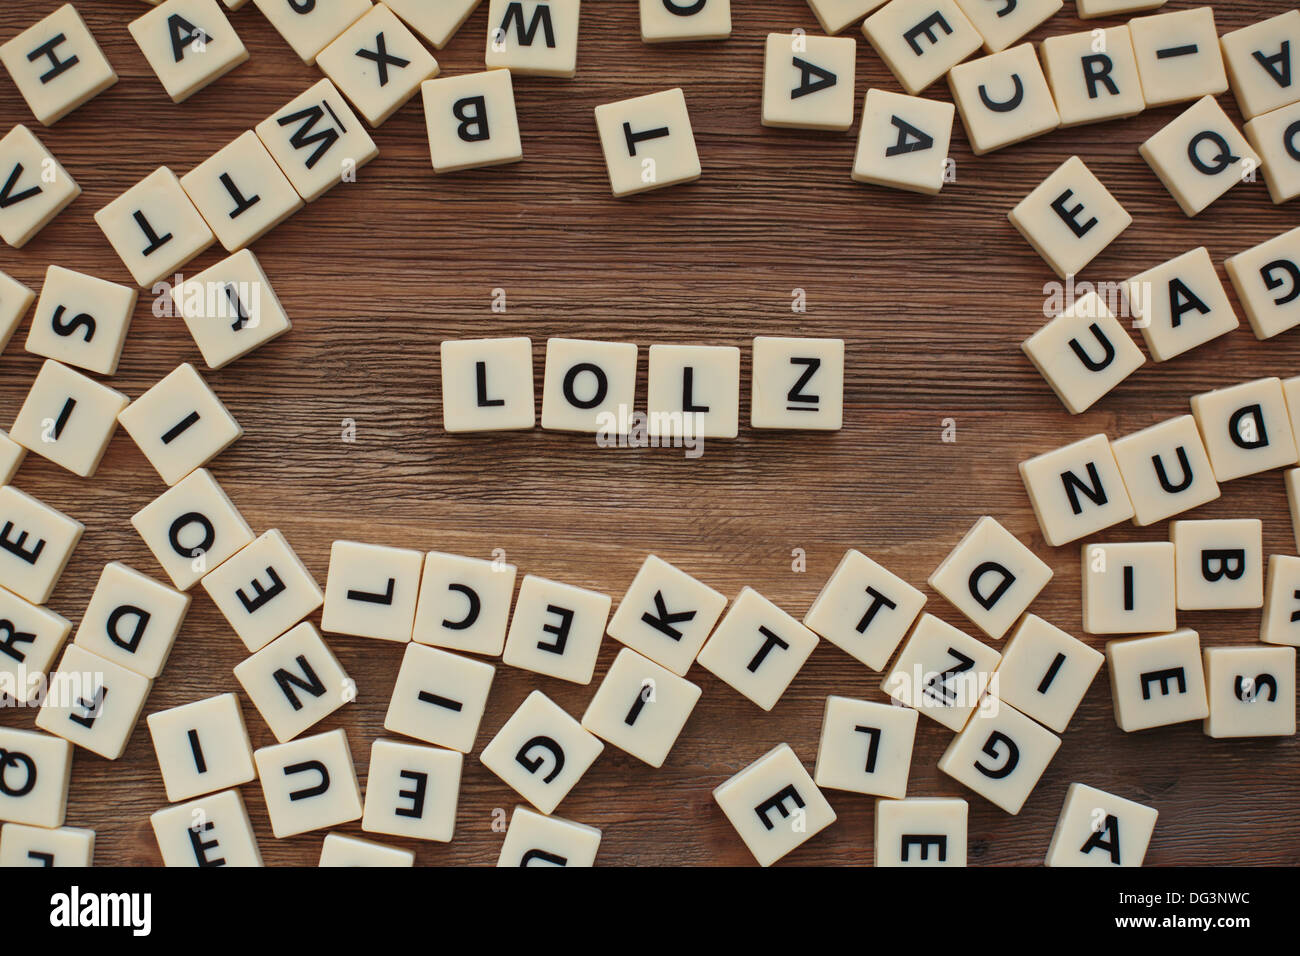 Plastic letters from a childrens' spelling game on a wooden table spell "LOLZ" Stock Photo